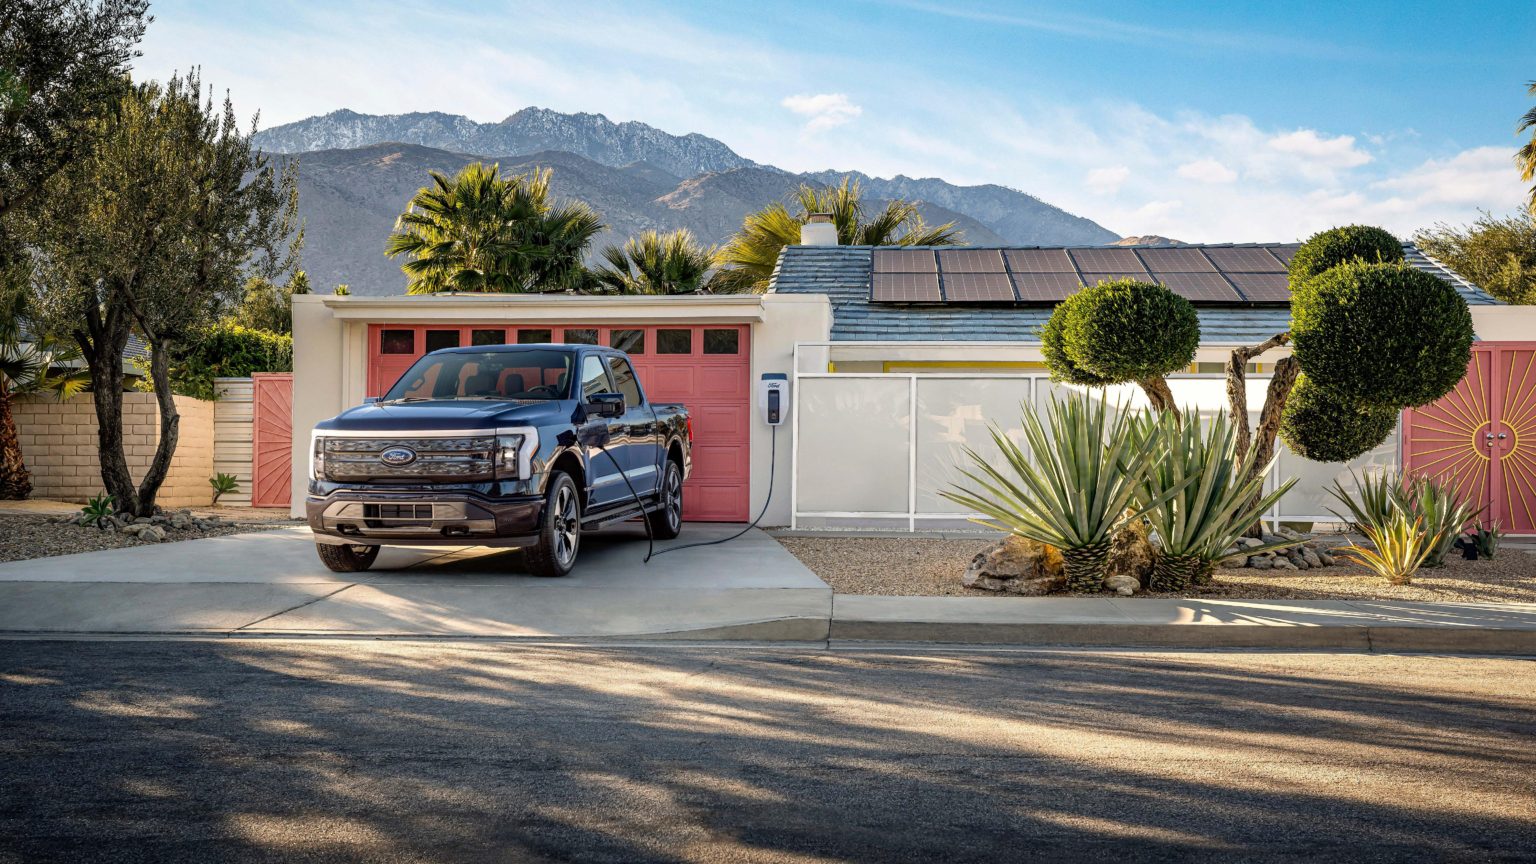 The new feature makes its debut with the F-150 Lightning.